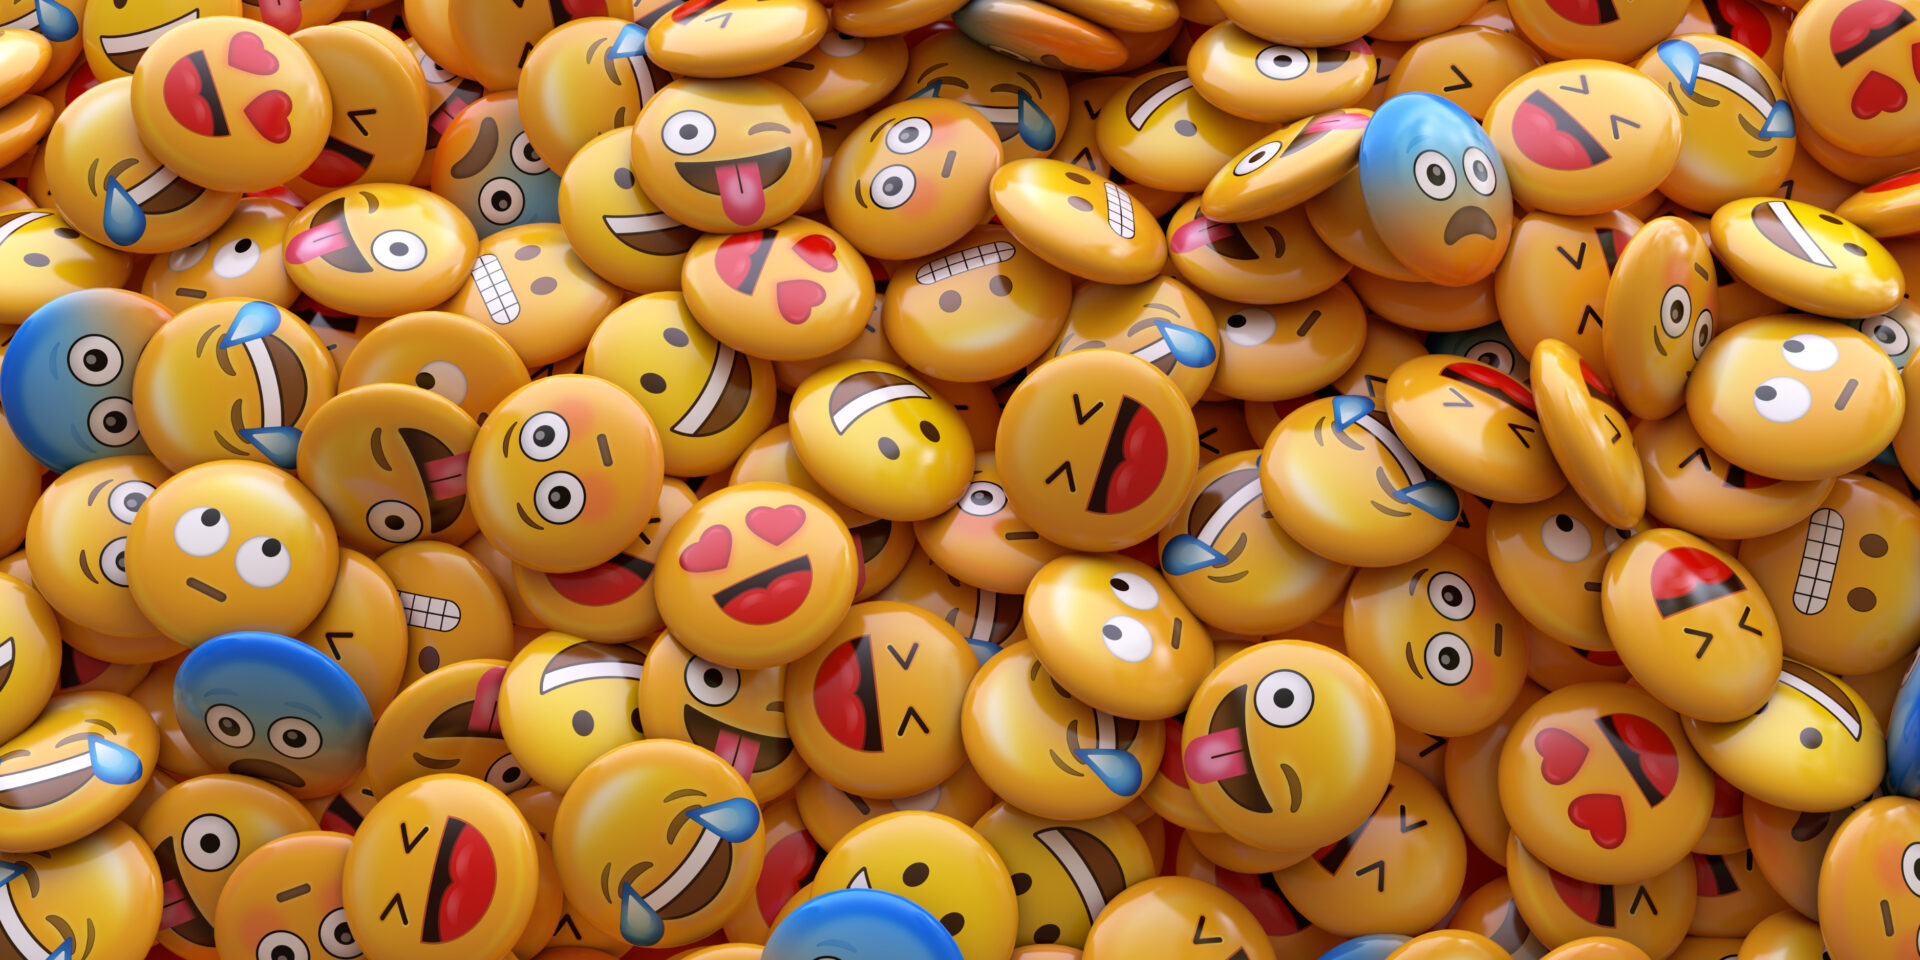 How will WhatsApp be updated with animated emojis?